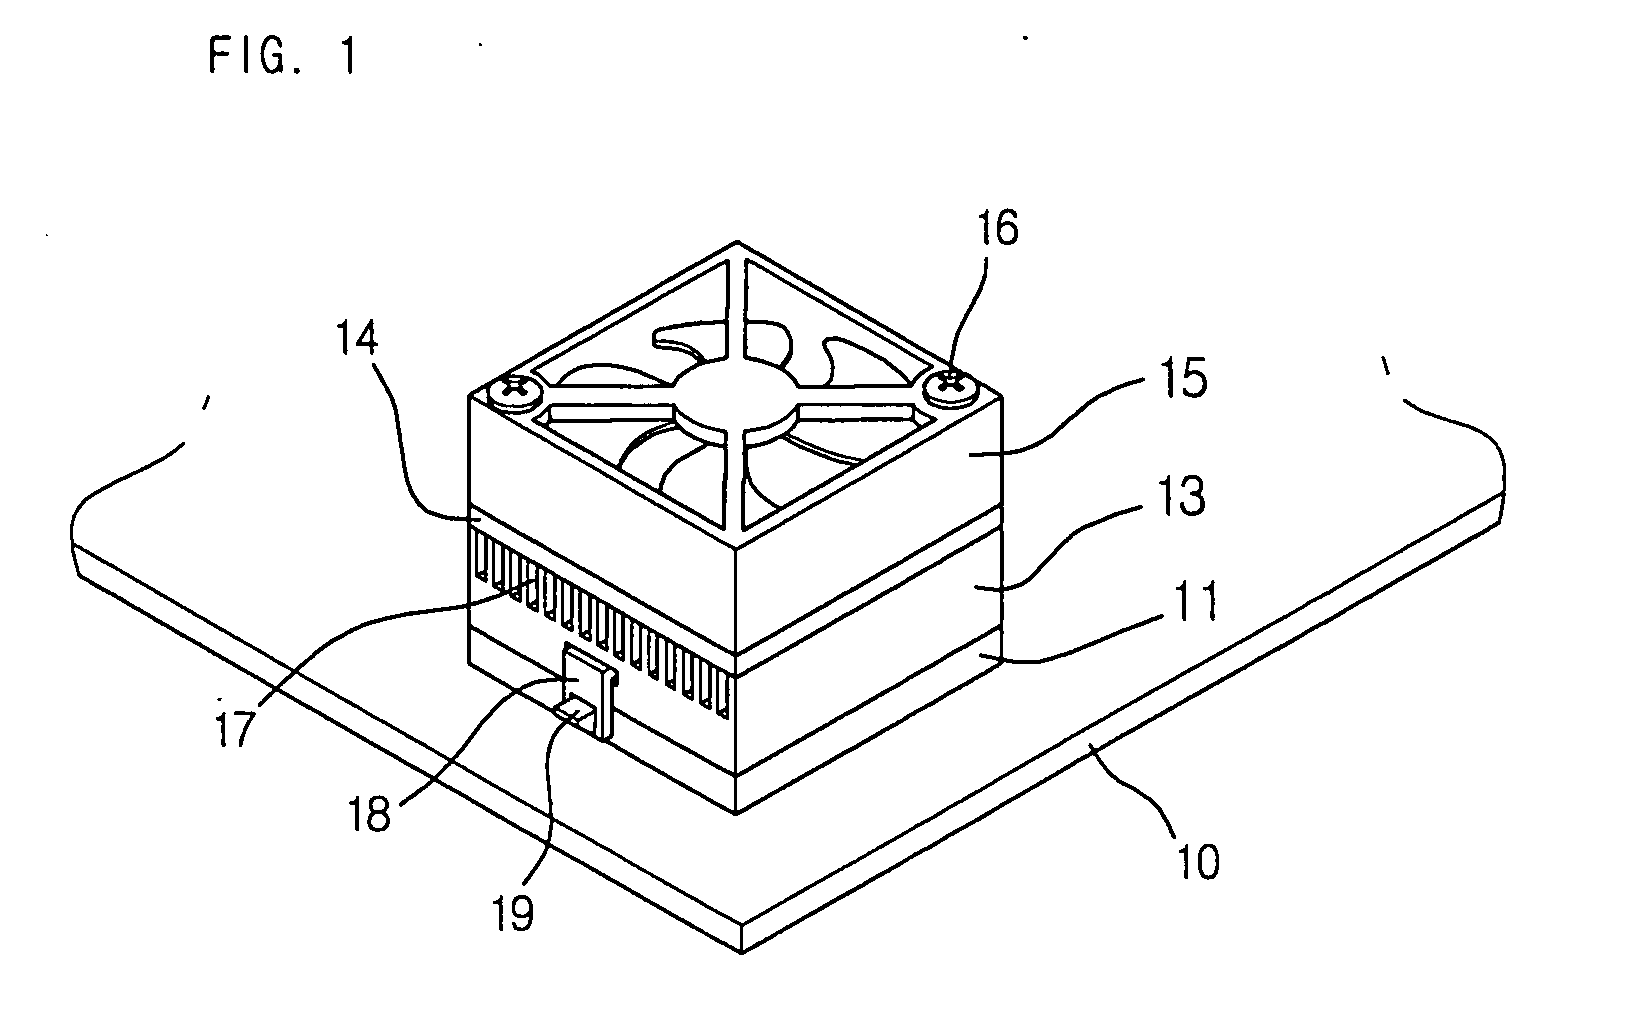 Apparatus for enhancing heat transfer efficiency of endothermic/exothermic article